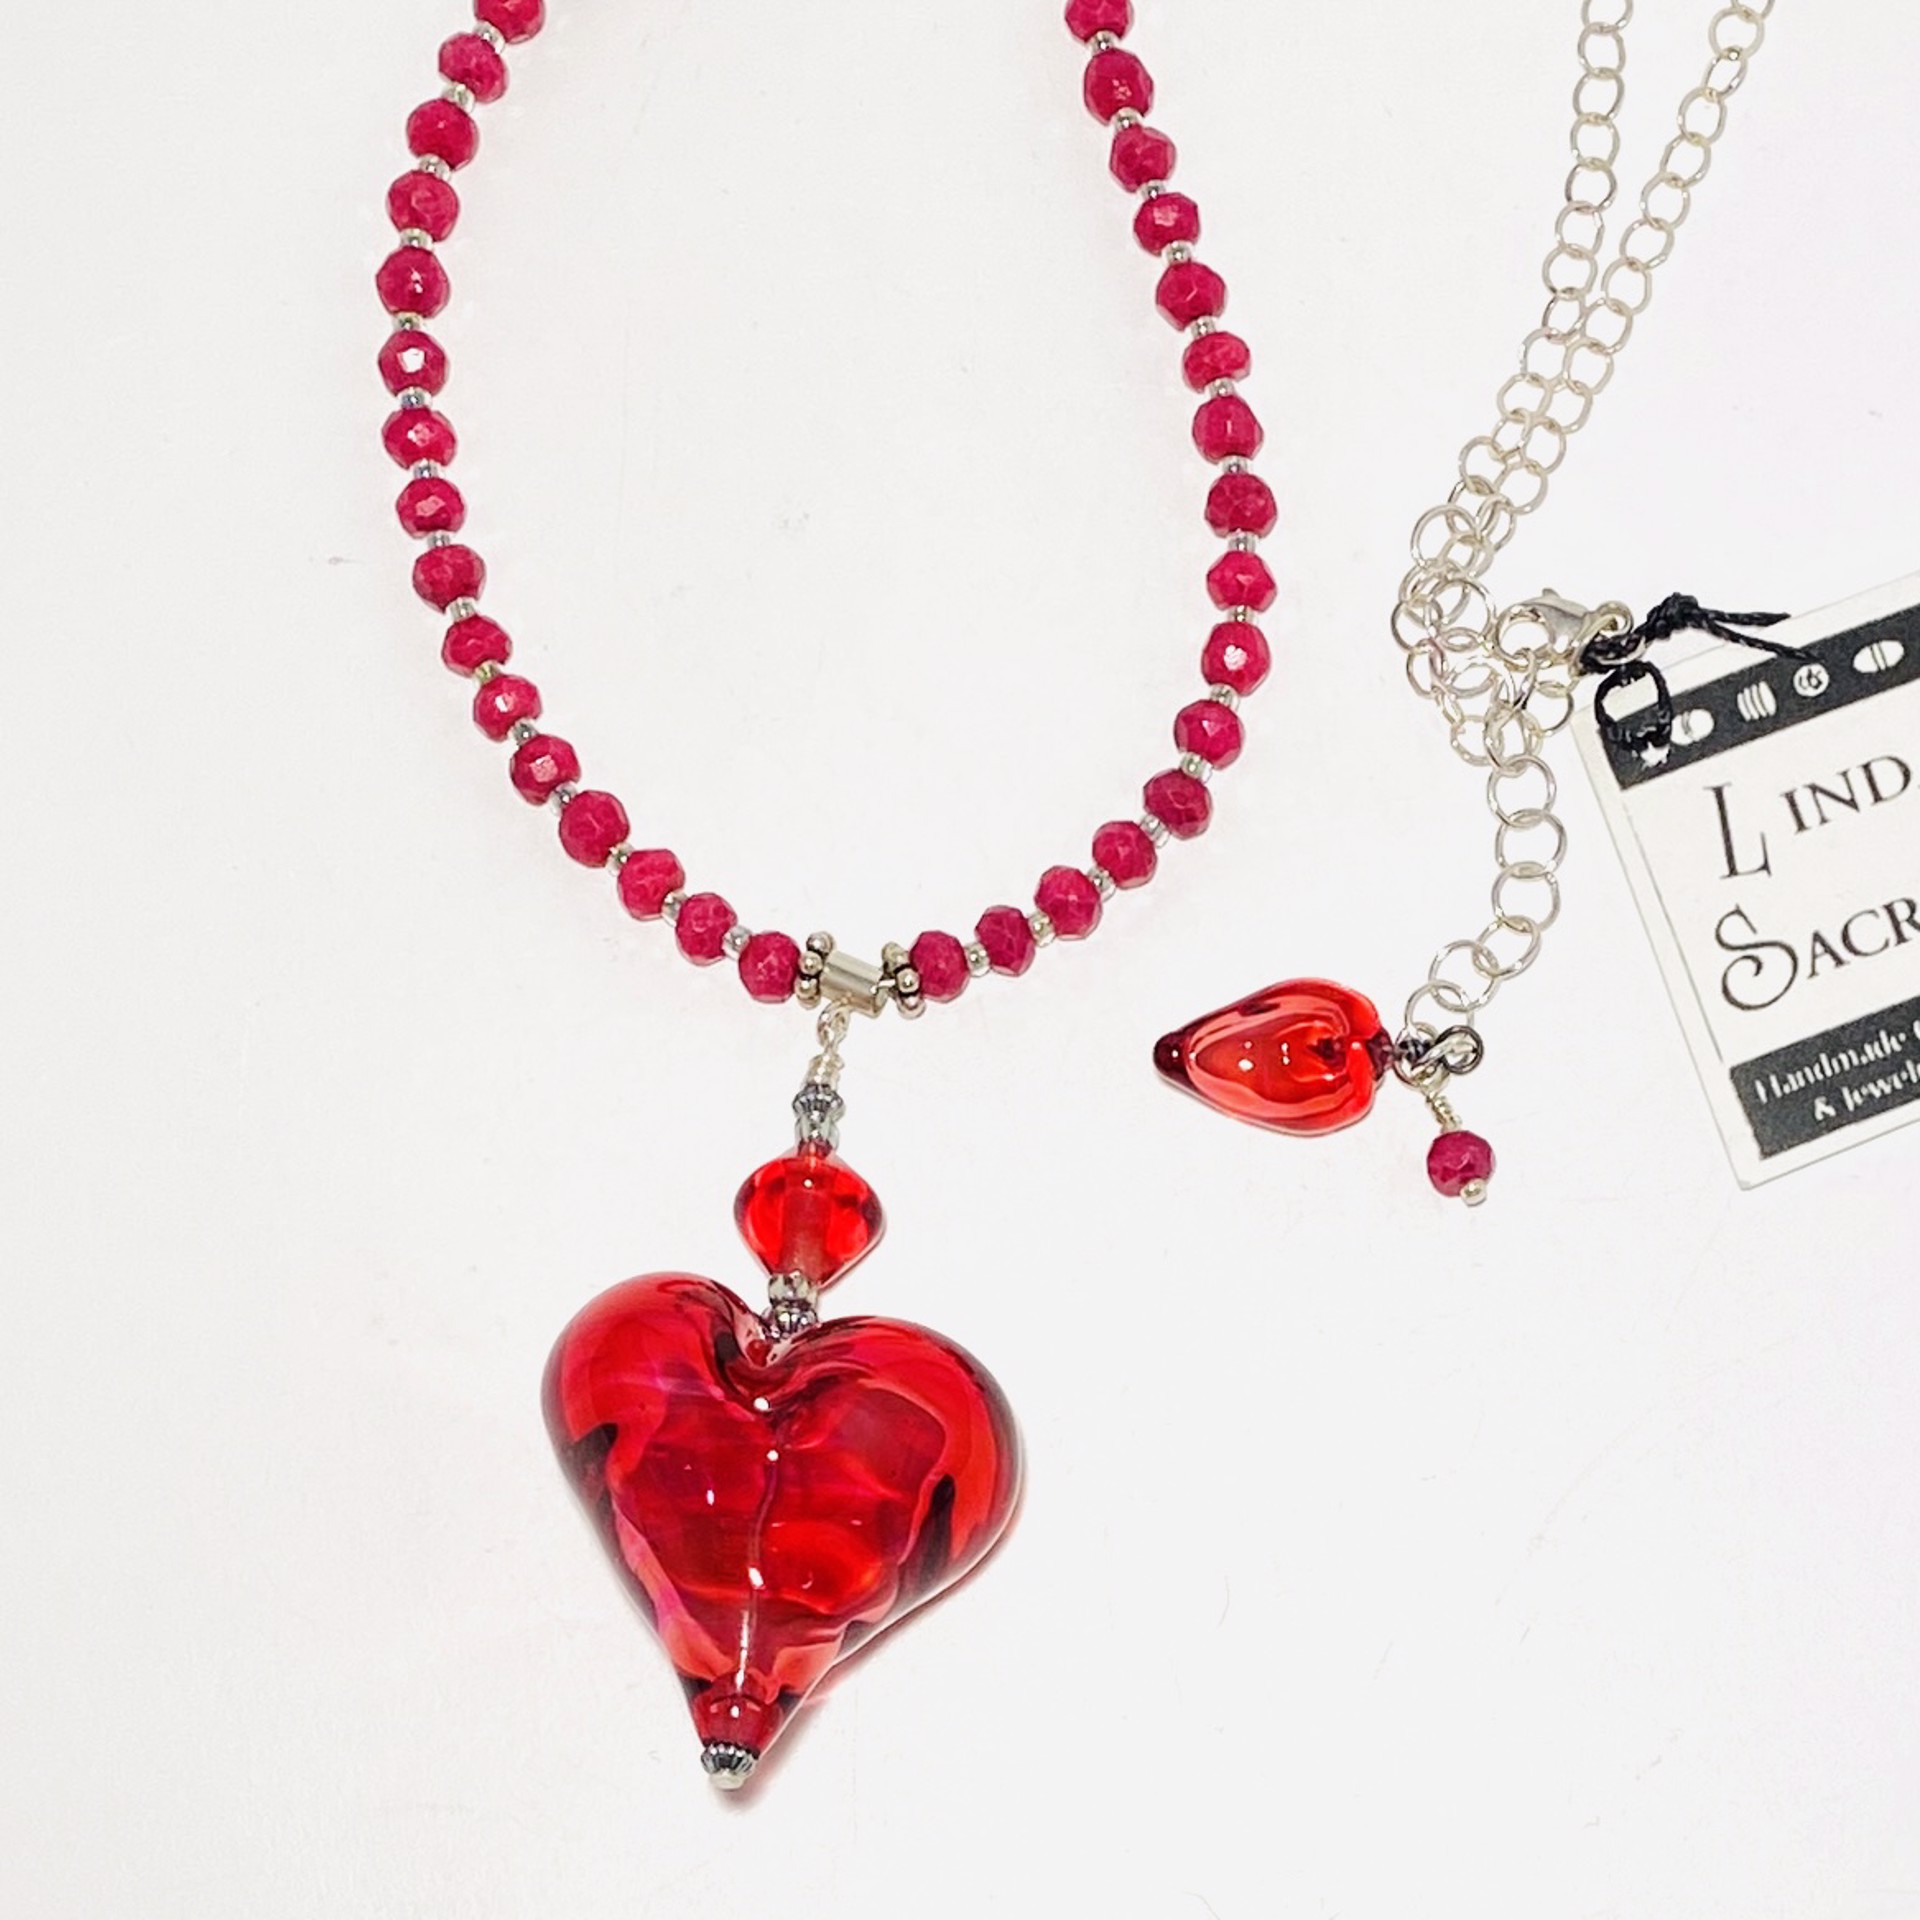 LS23-14A Ruby Gold Hollow Built Heart Faceted Ruby Bead and Sterling Chain Necklace by Linda Sacra